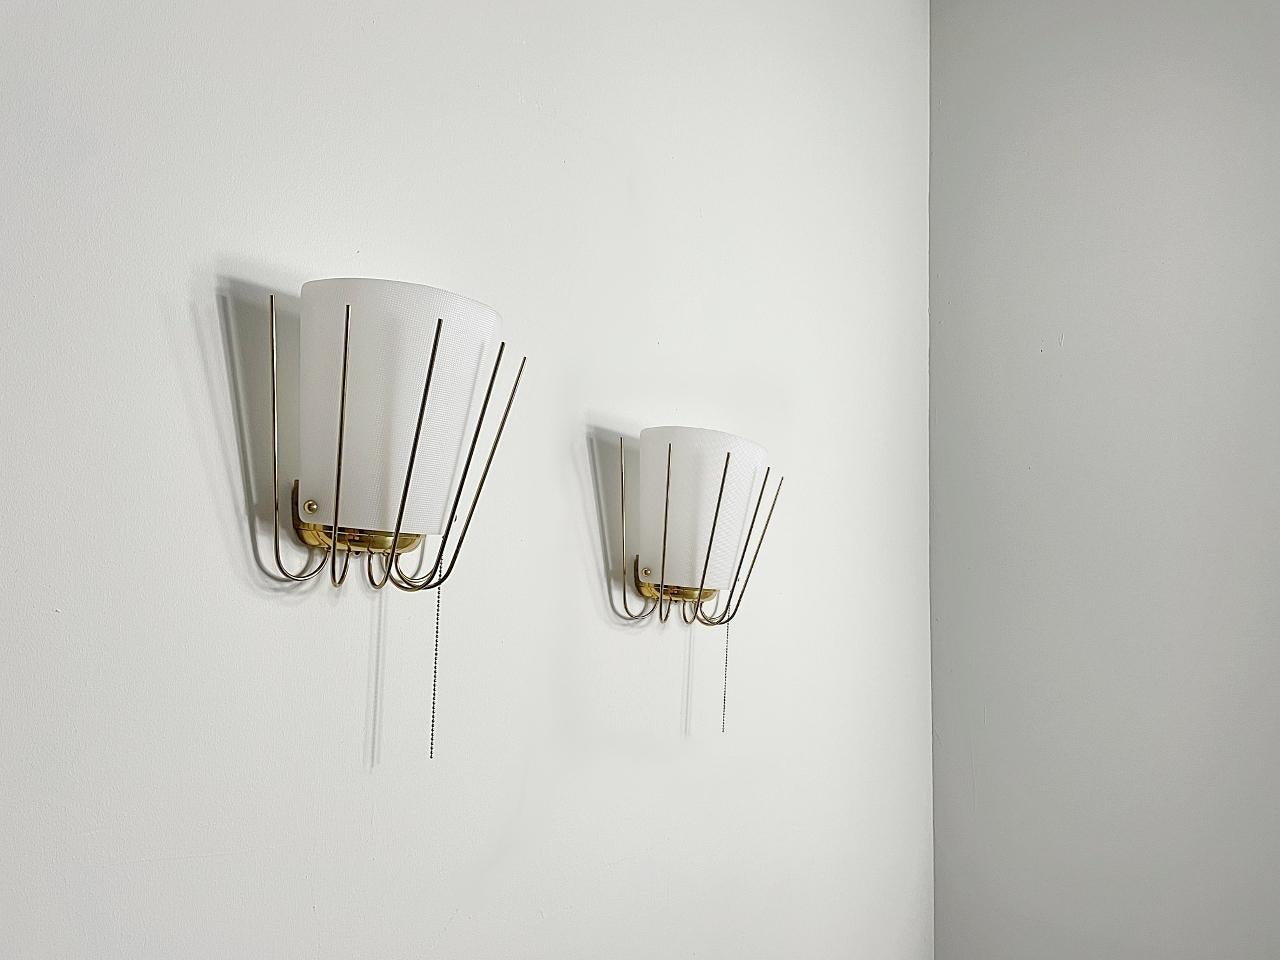 Beautiful Modernist wall sconces made by J. T. Kalmar in the 1950s. The light is made of polished brass and the lampshades are made of acrylic glass. The faceted acrylic glass provides a smooth large-area light.
Fully rewired, working and tested